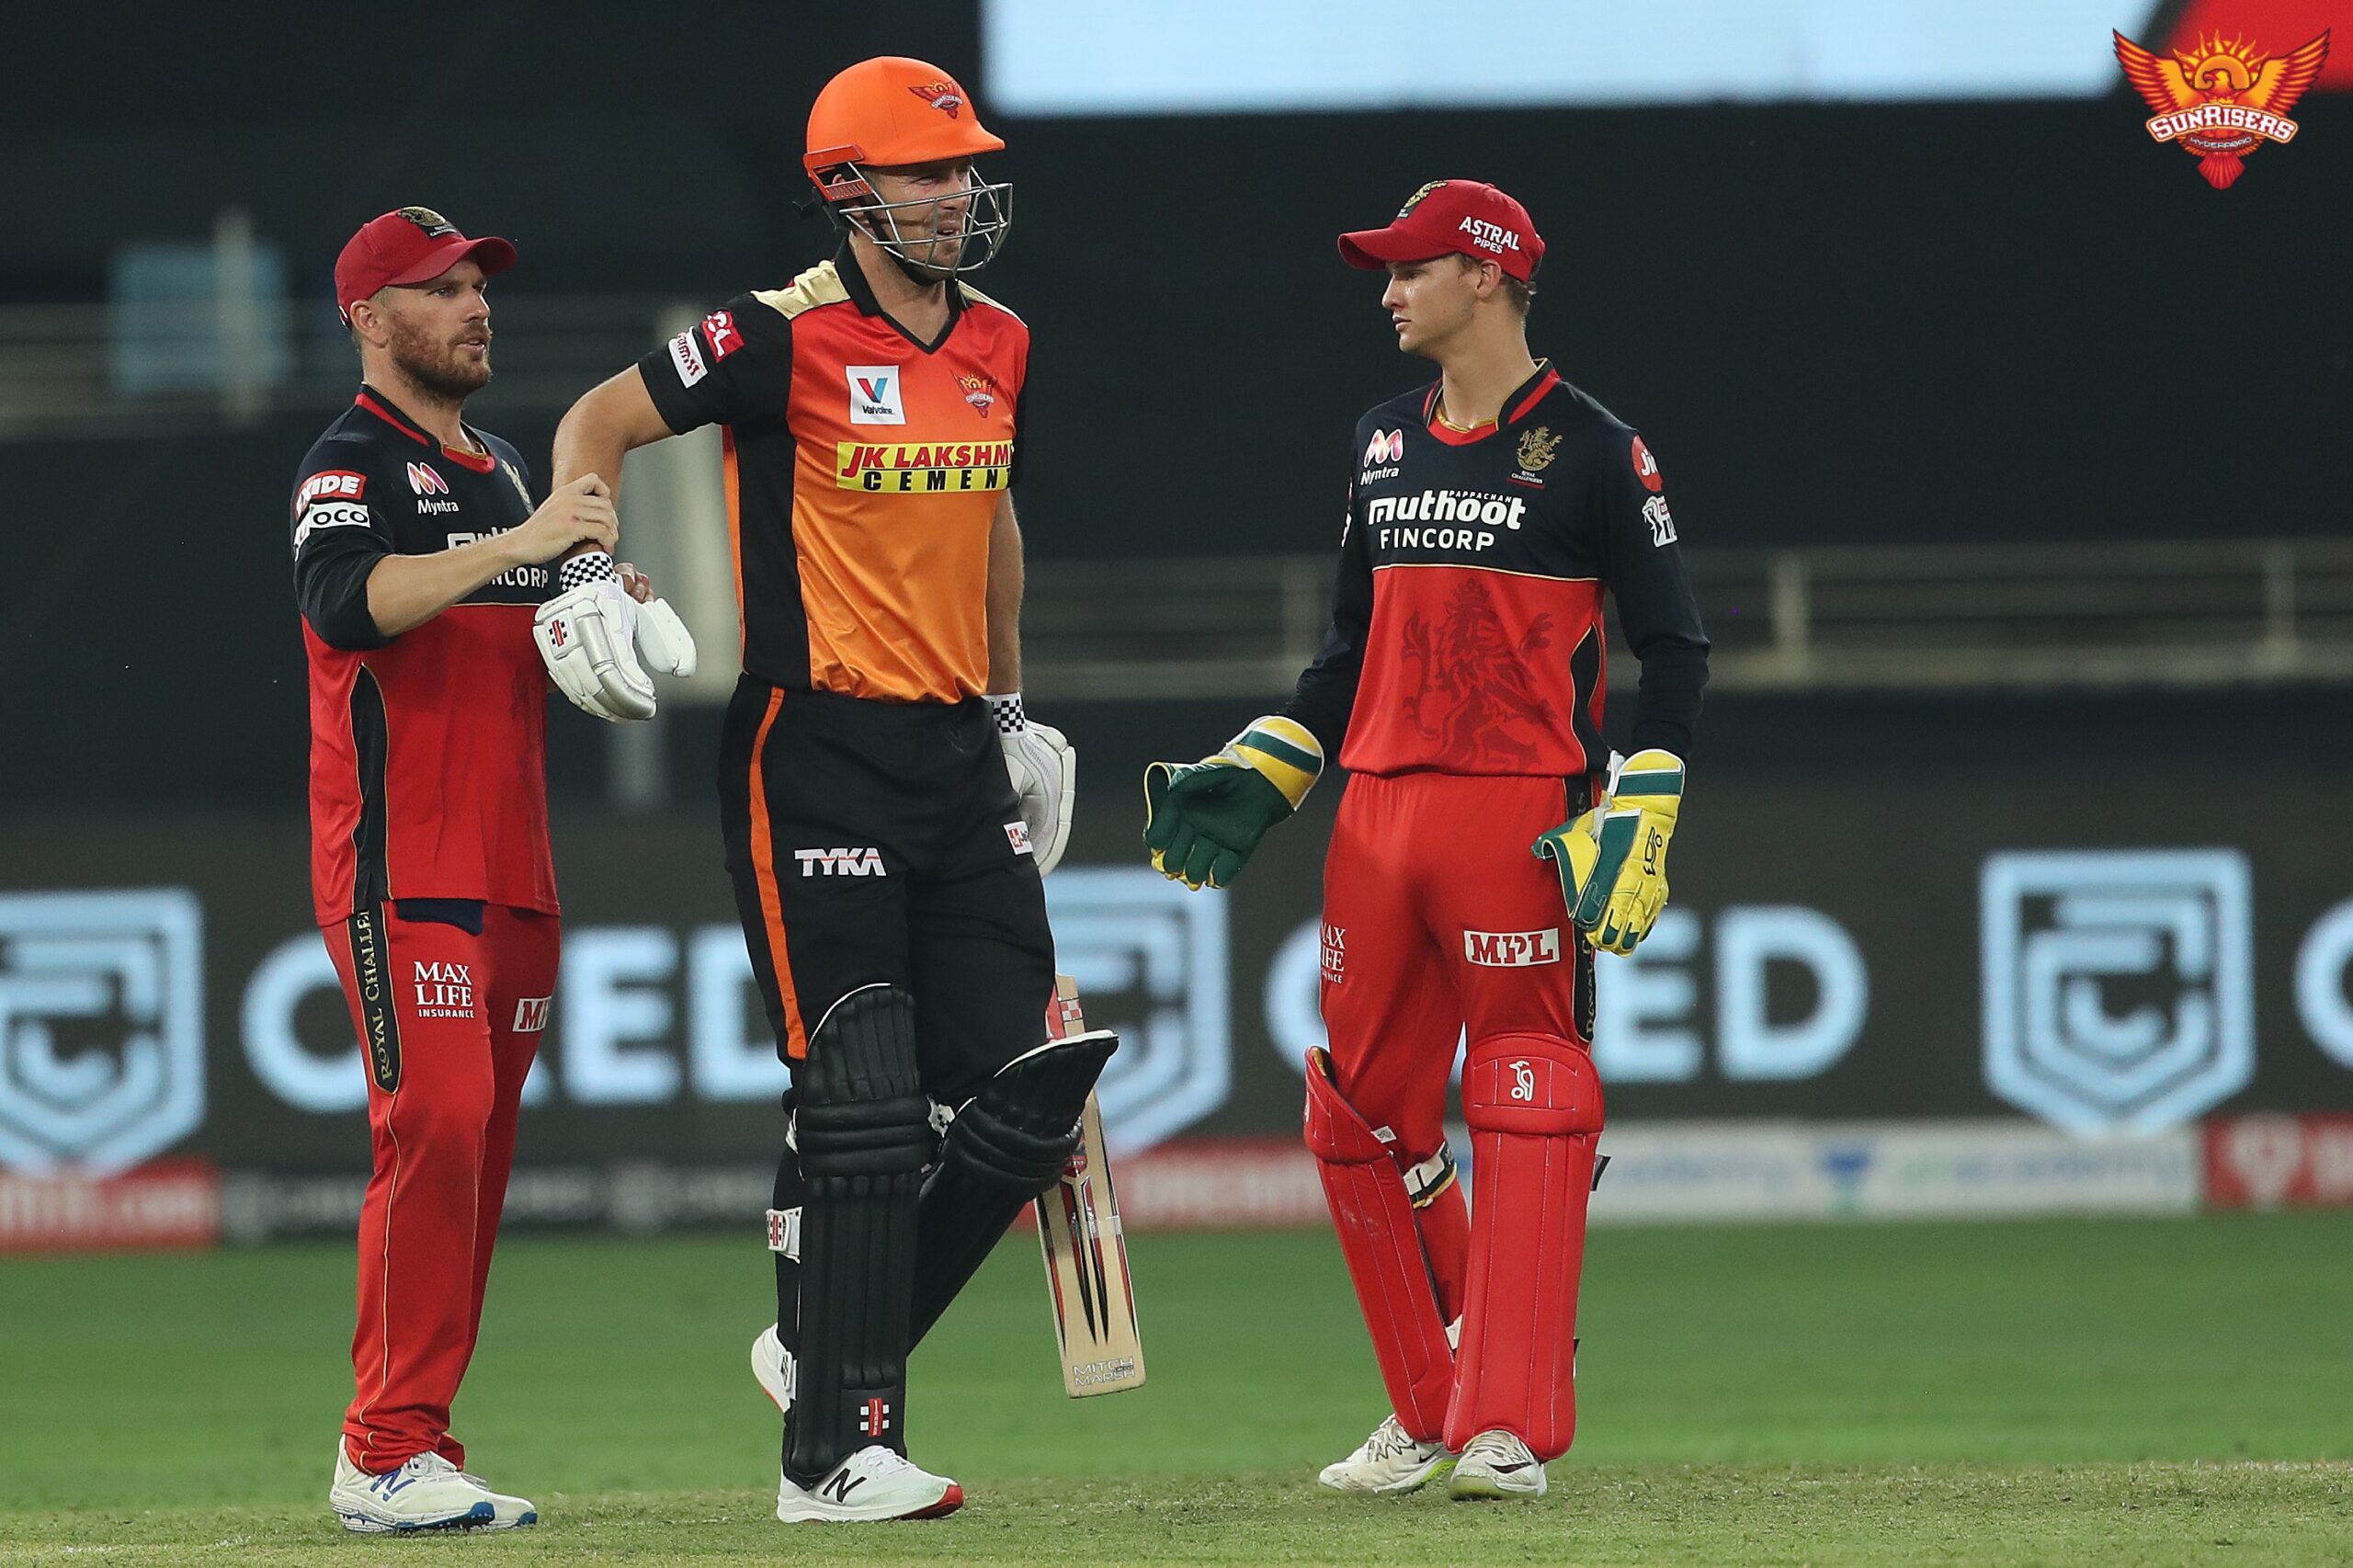 Mitchel Marsh out of IPL due to injury